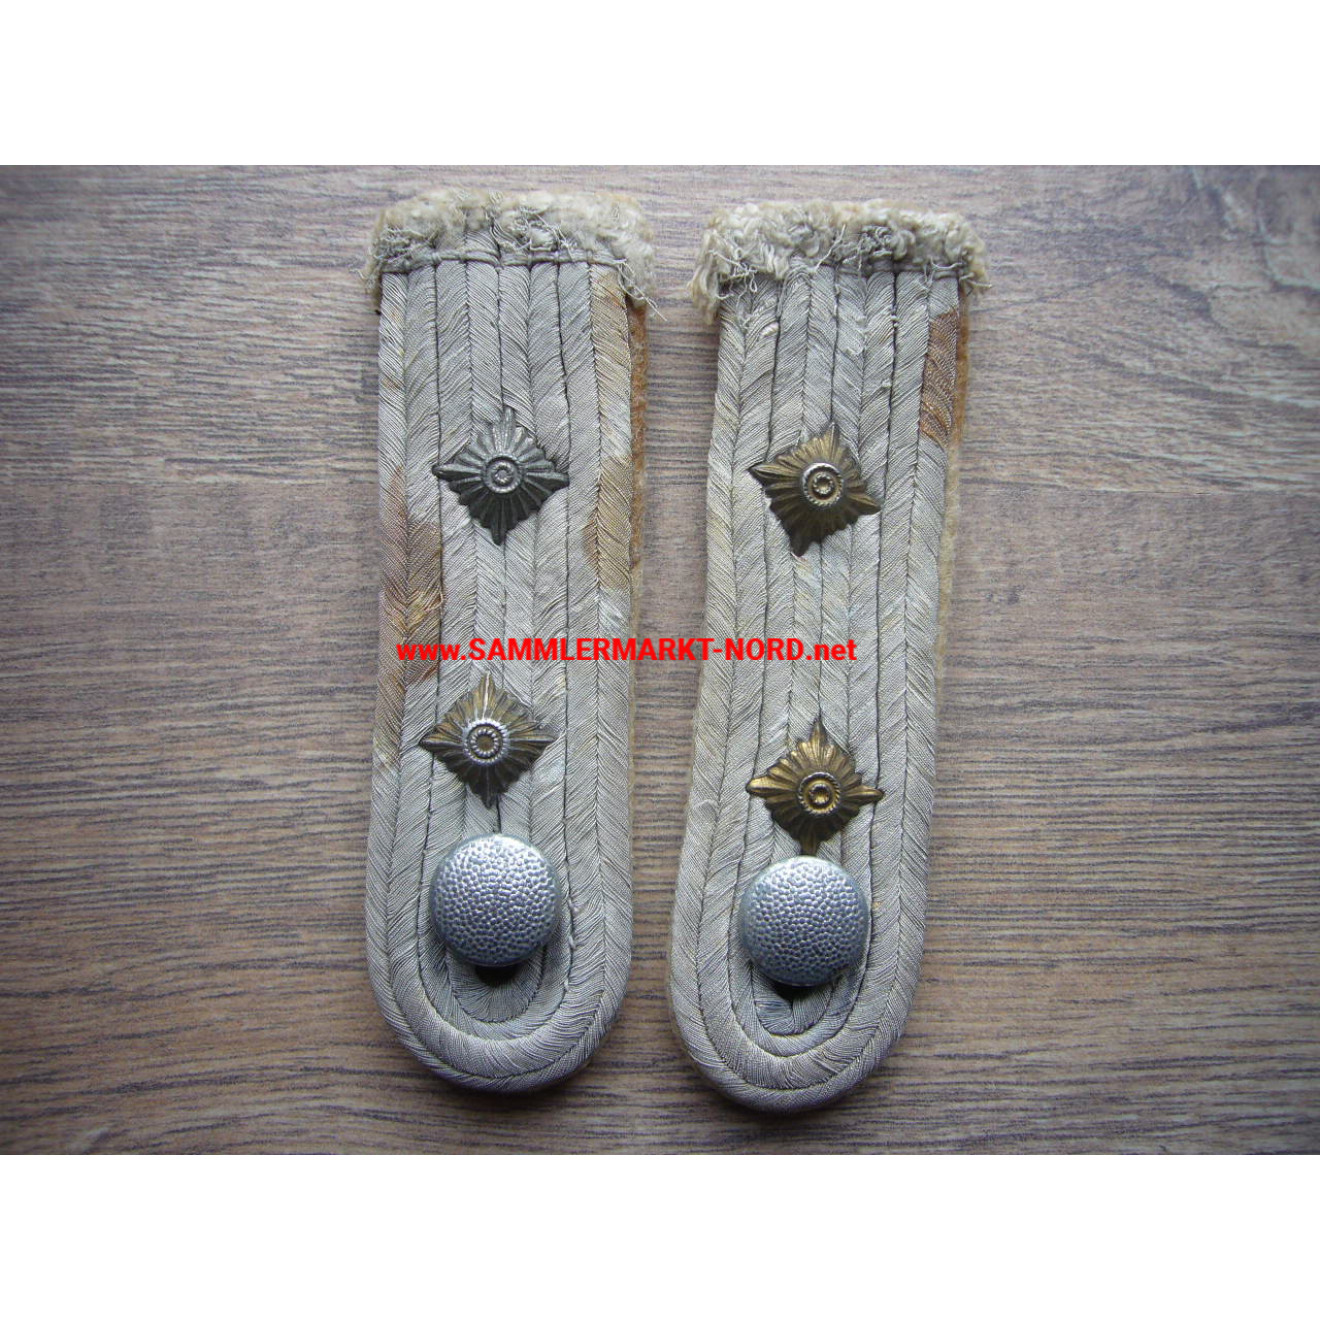 Wehrmacht Infantry - Pair of Shoulder Boards First Lieutenant